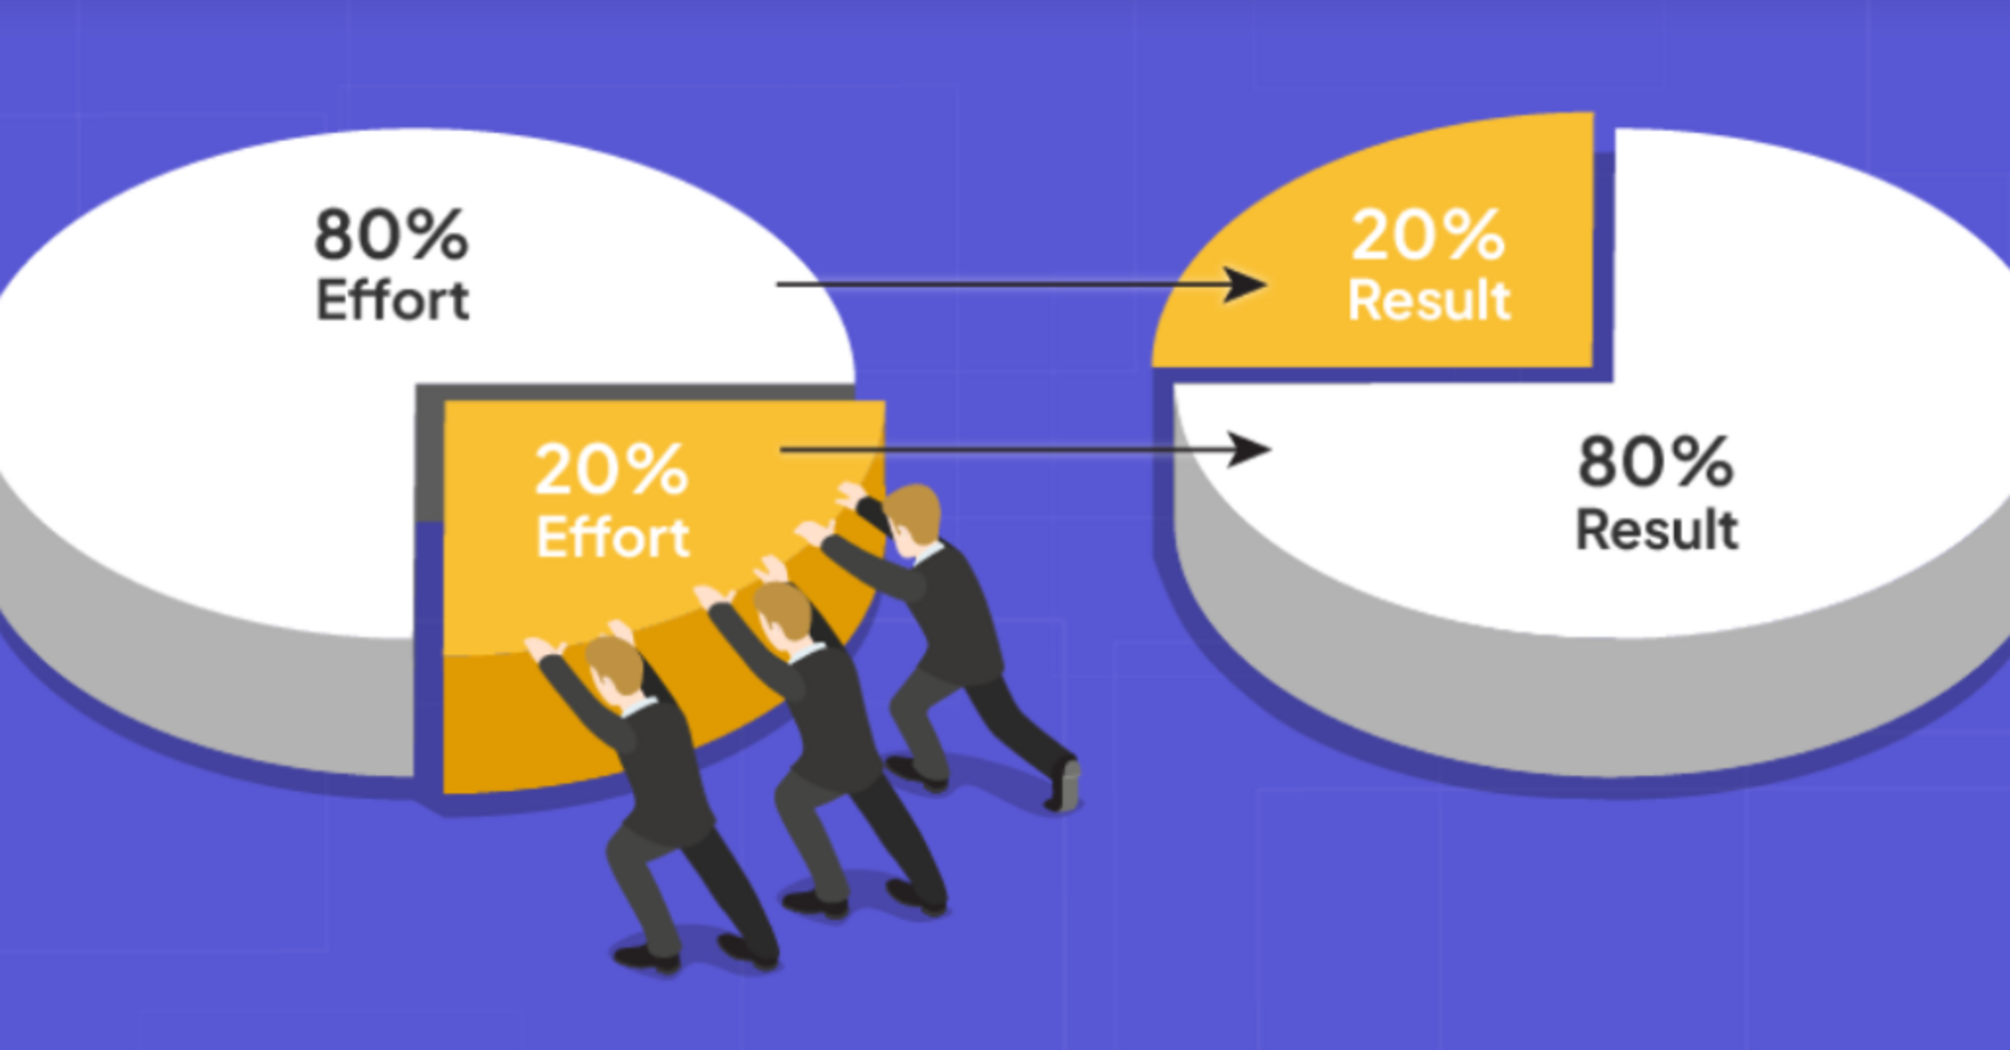 How the Pareto Law works